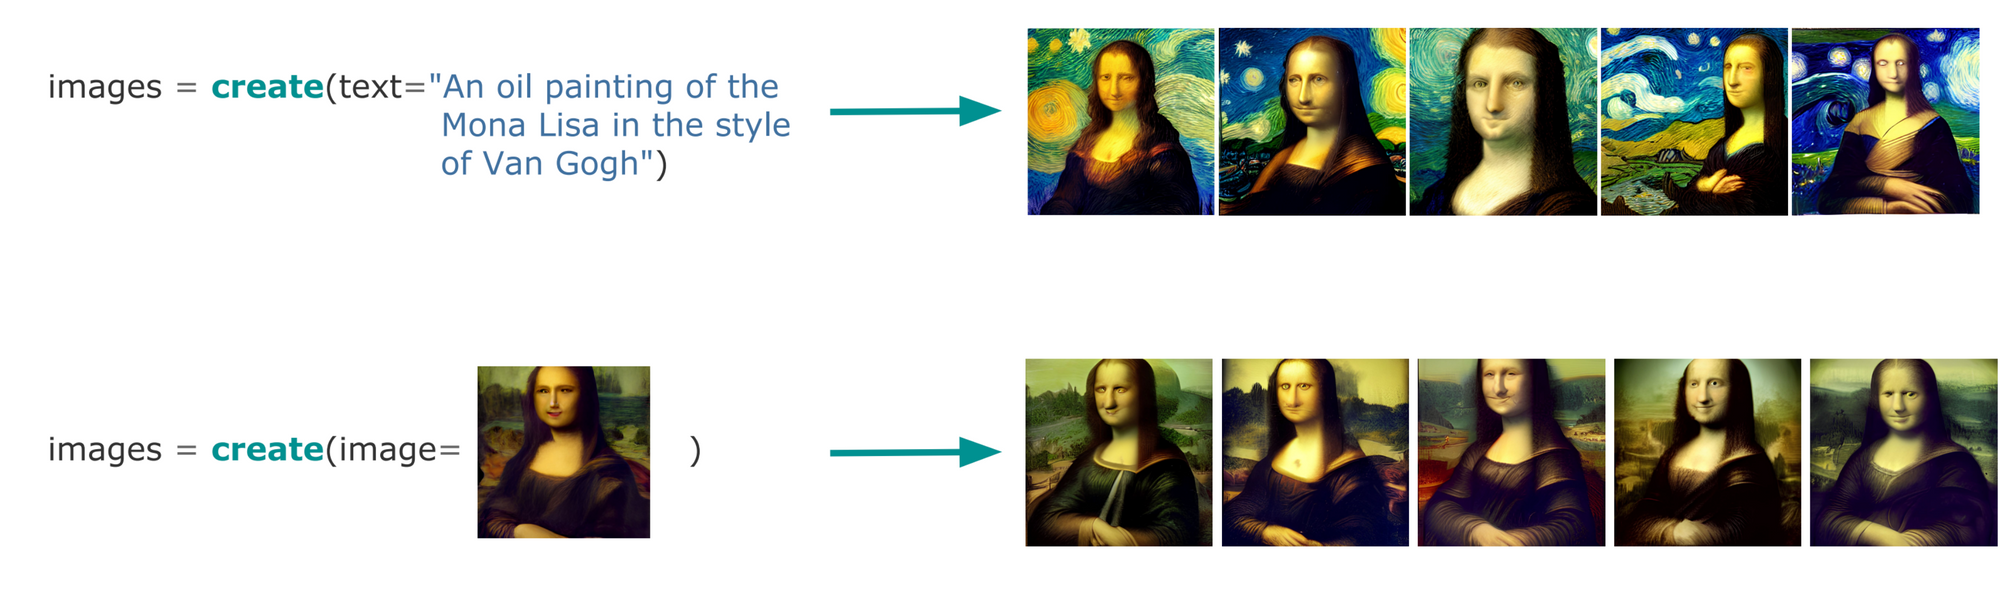 A grid of Mona Lisa images, some in Van Gogh's style, illustrating artistic transformations via an OpenCV `create` function.